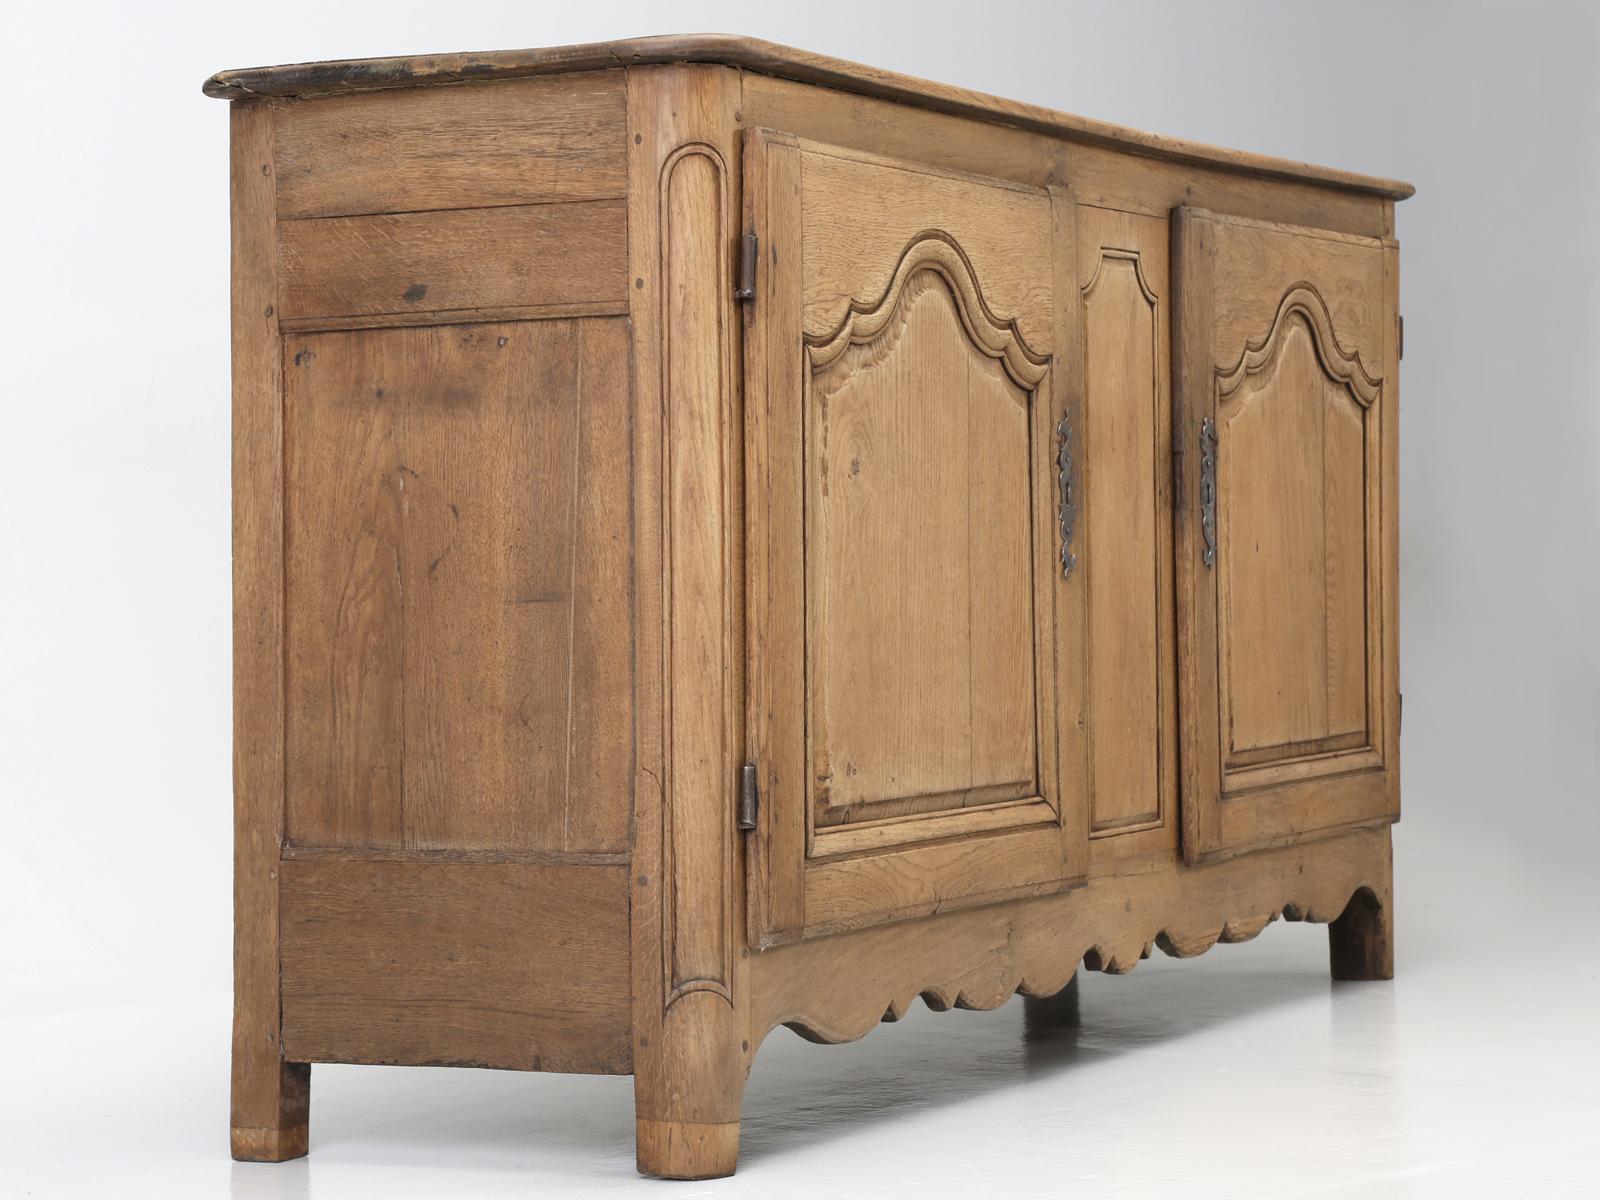 Antique French buffet or sideboard if you prefer to call it, was probably constructed in the late 1700s or very early 1800s and has somehow magically escaped the hands of any restorer. In the antique business, we always prefer to purchase an object,